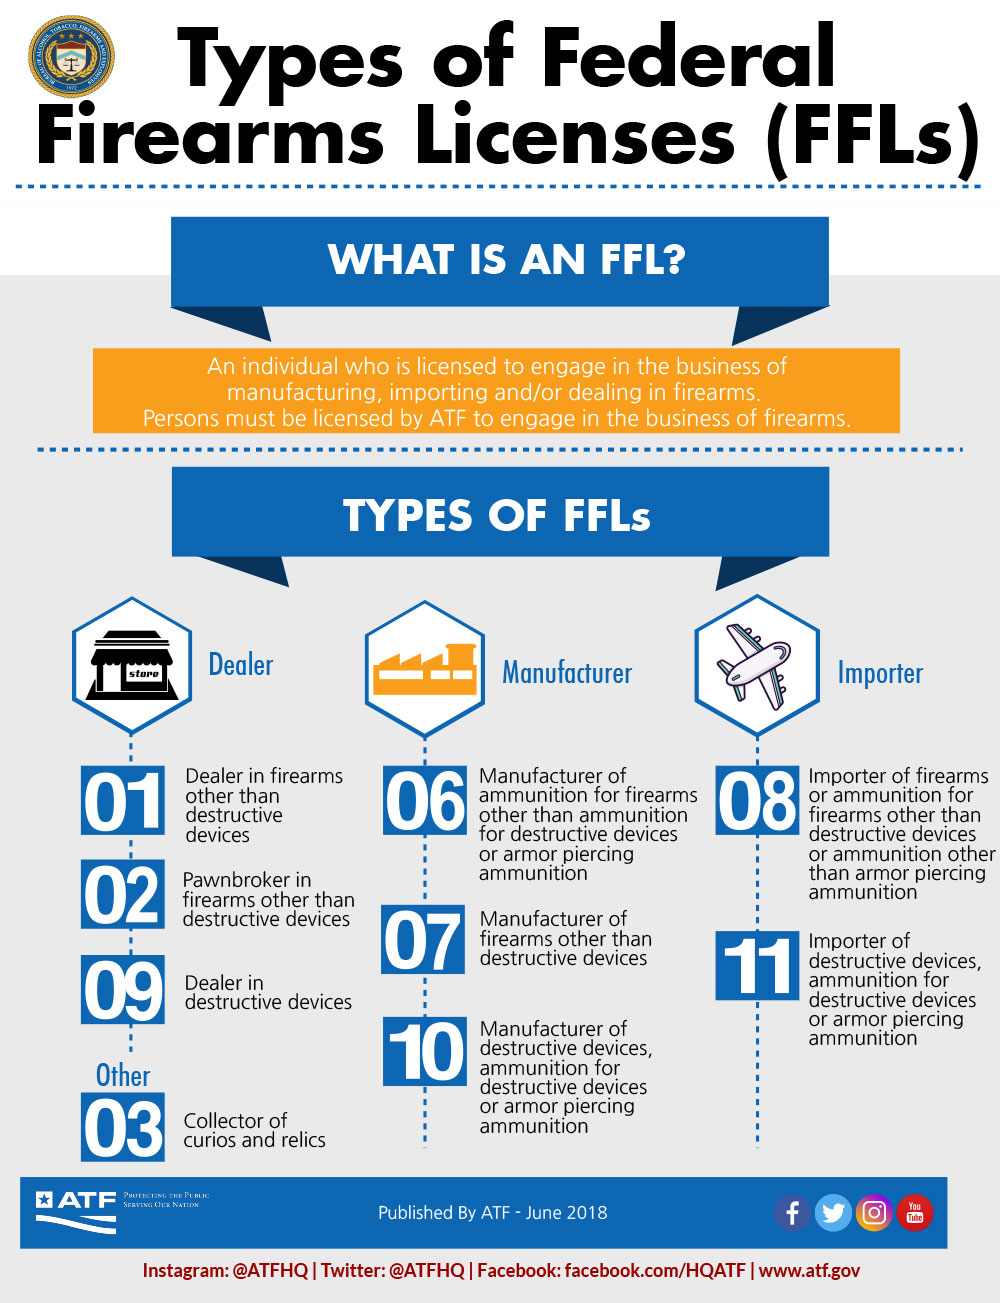 Types of Federal Firearms Licensees (FFLs)